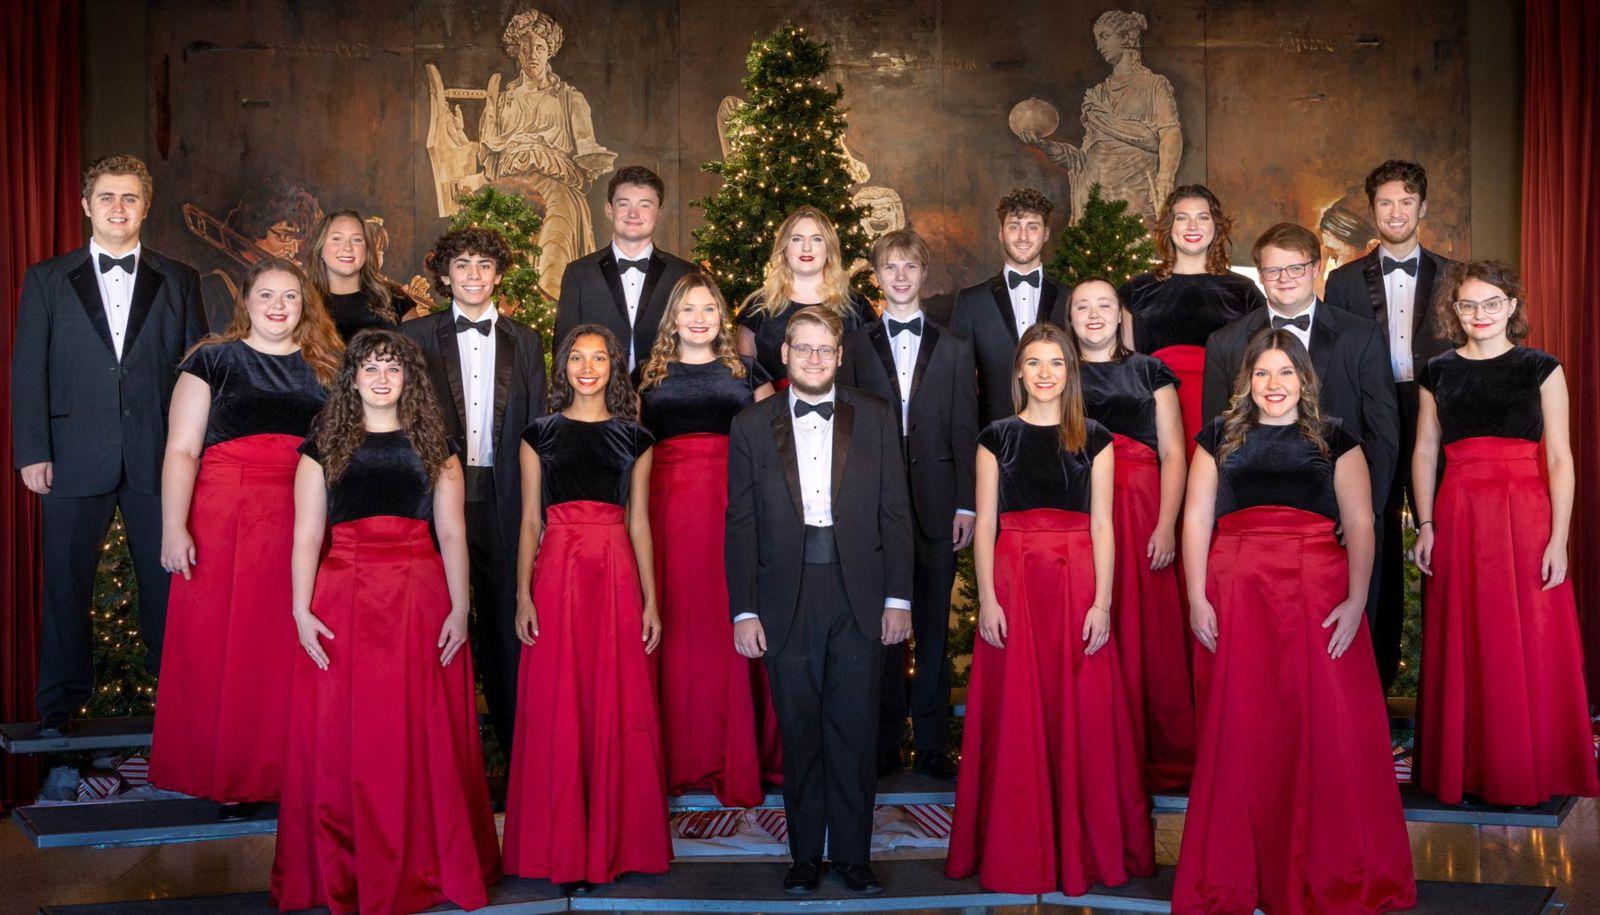 The 23-24 A Cappella Choir and Gadsden State Singers